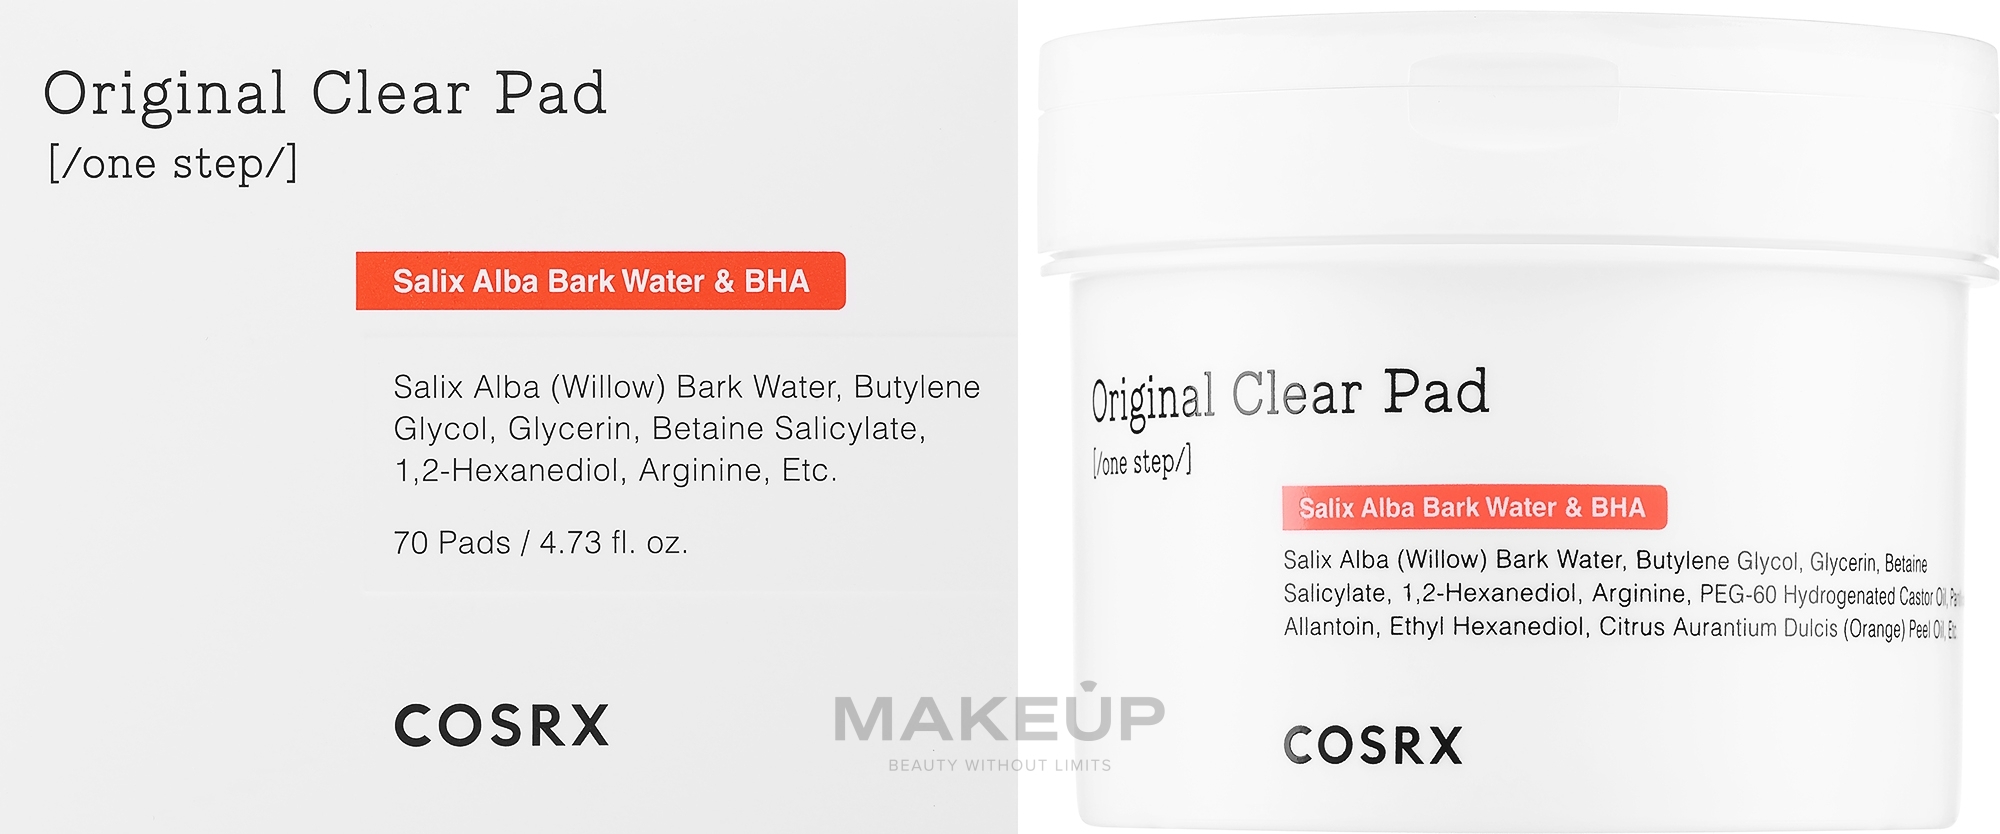 Cleansing Pads with BHA-Acids - Cosrx One Step Original Clear Pads — photo 70 szt.